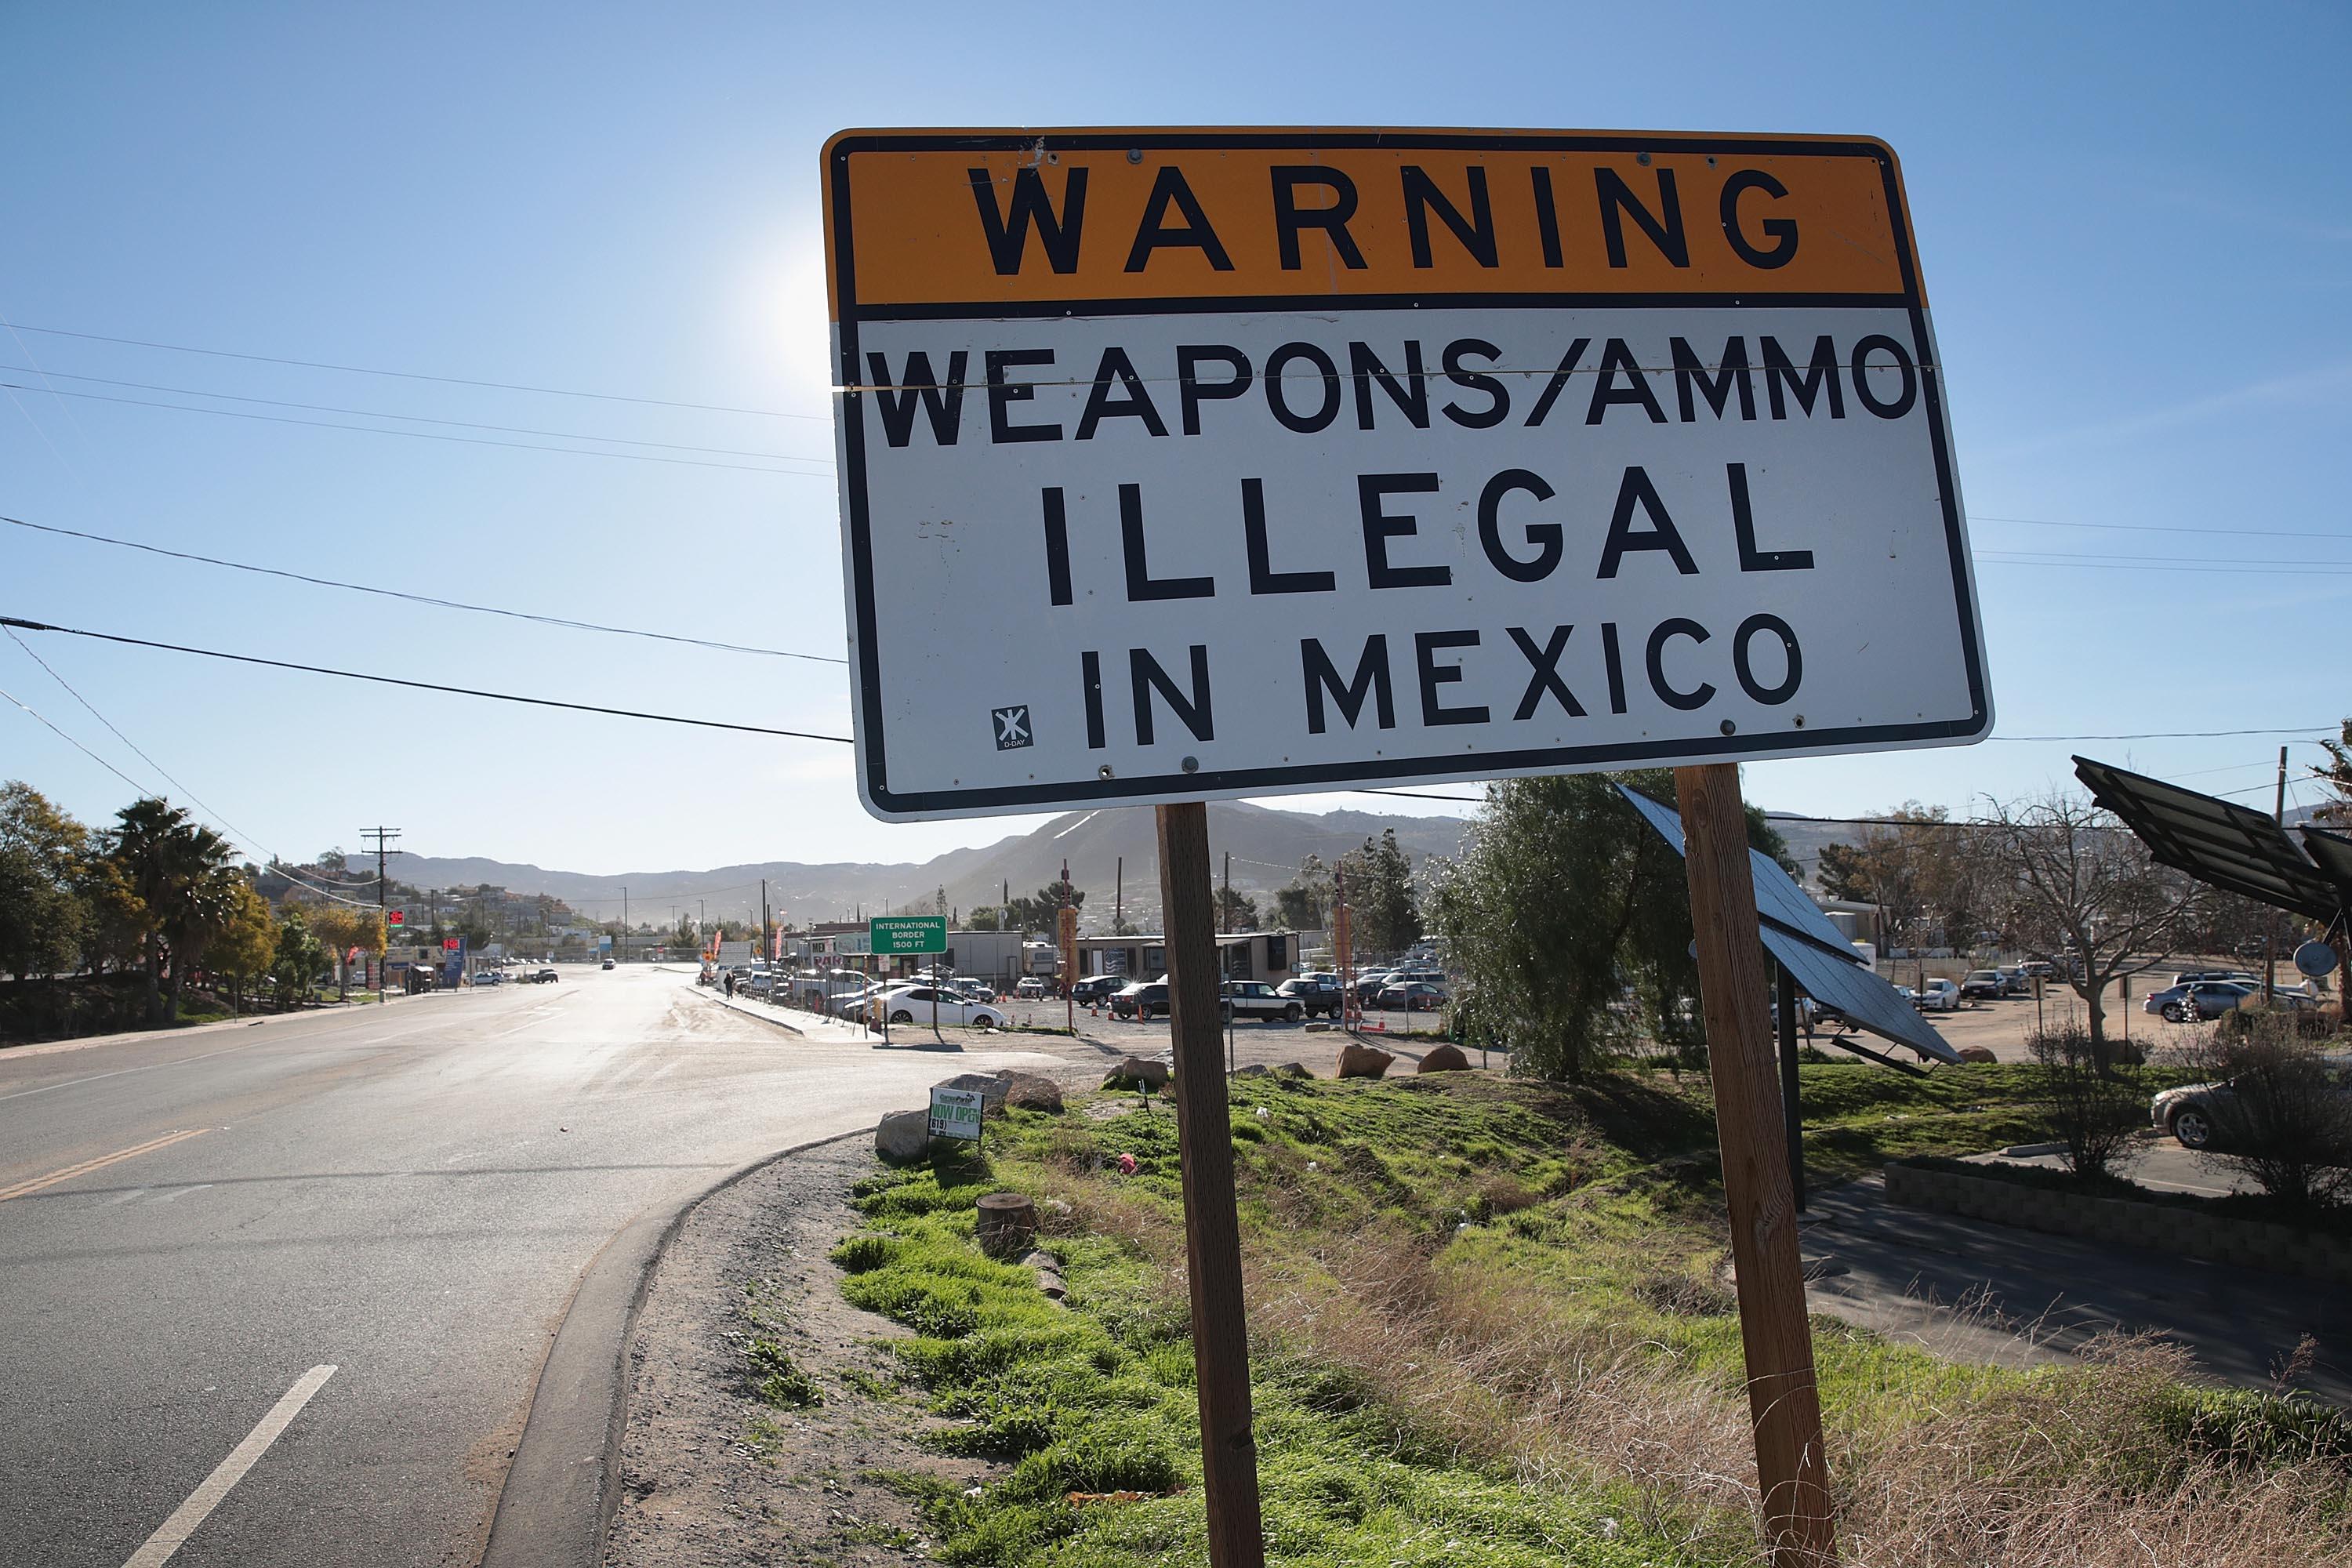 Mexico Is Flooded With American Guns. So the Country’s Suing Companies Like Glock and Smith & Wesson. Mary Harris